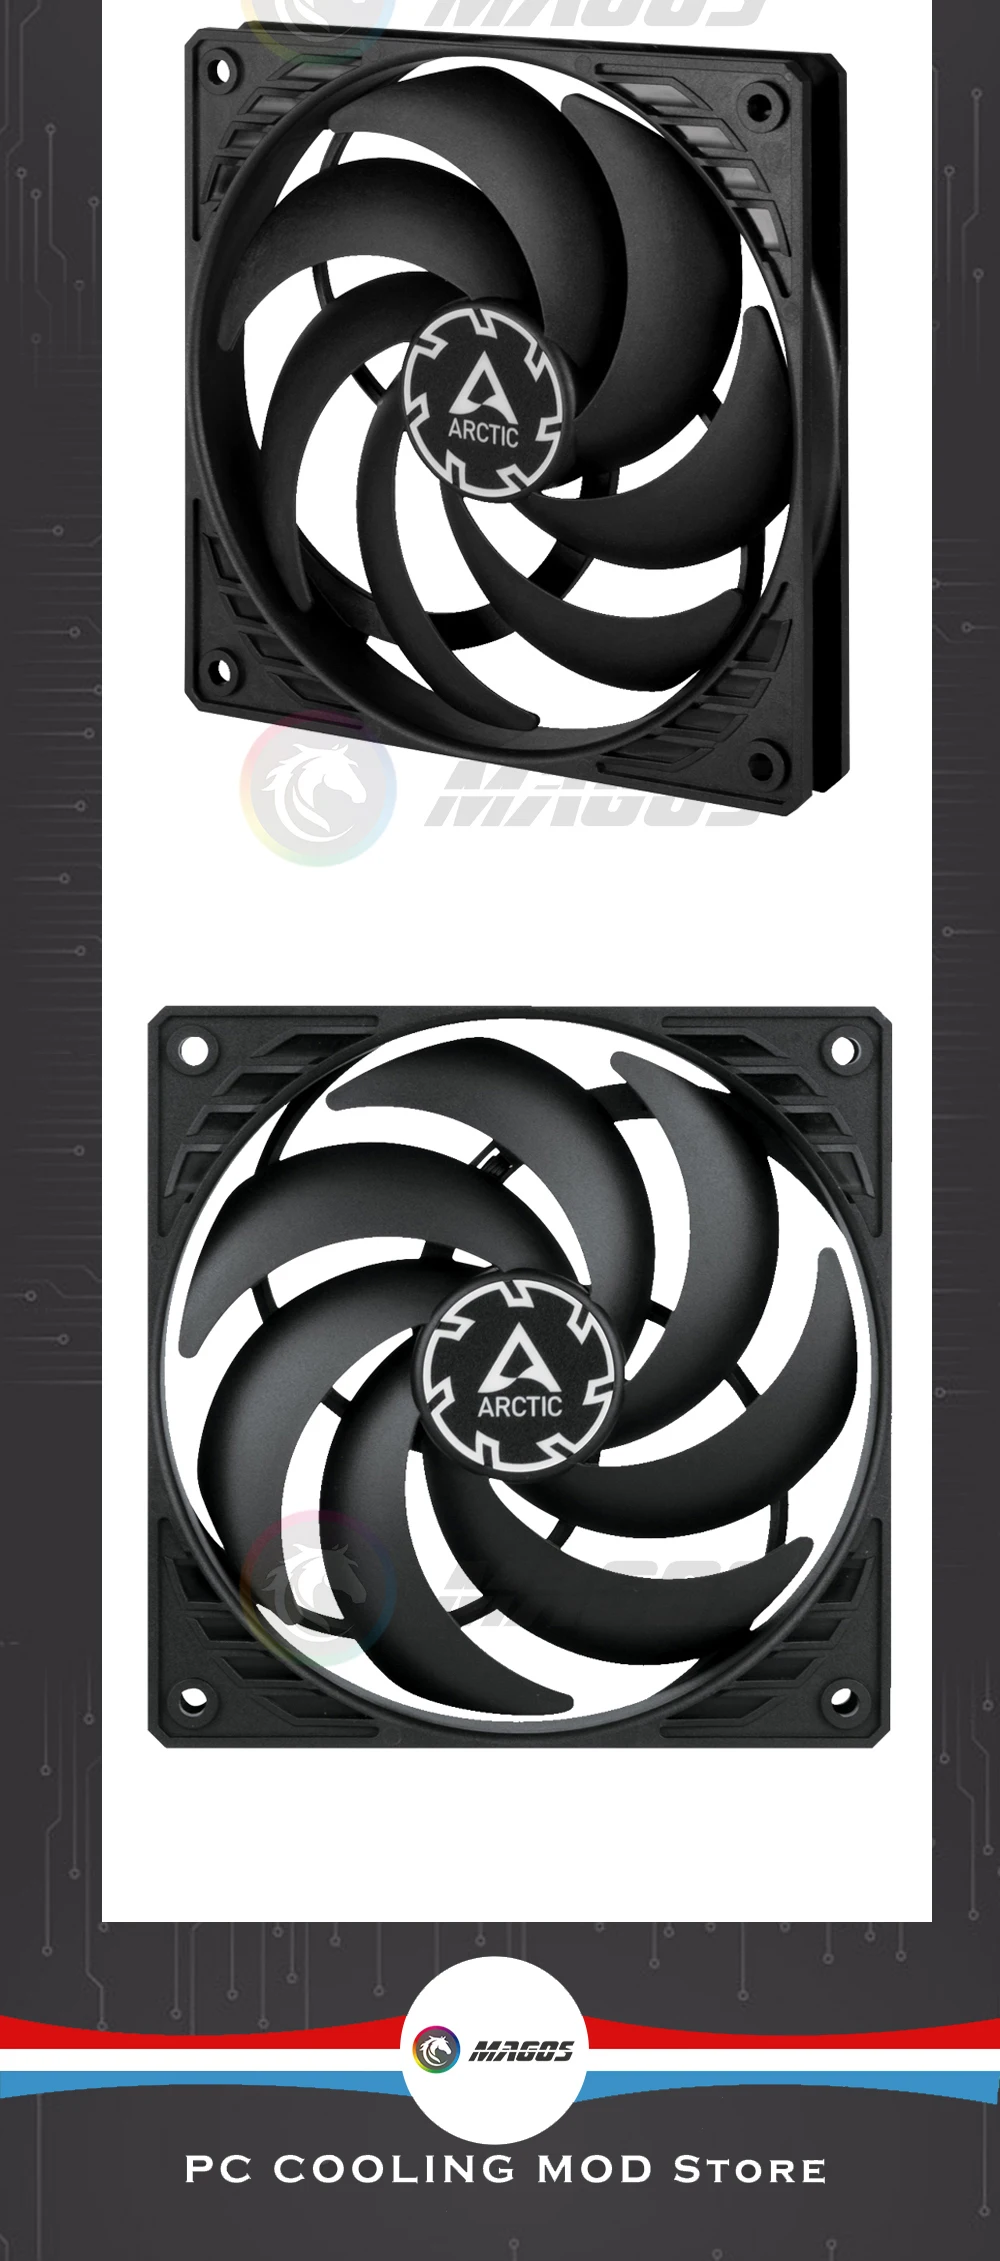  ARCTIC P12 Slim PWM PST (3 Pack) - 120 mm Case Fan with PWM  Sharing Technology (PST), Pressure-optimised, Quiet Motor, Computer, Extra  Slim, 300-2100 RPM - Black : Automotive